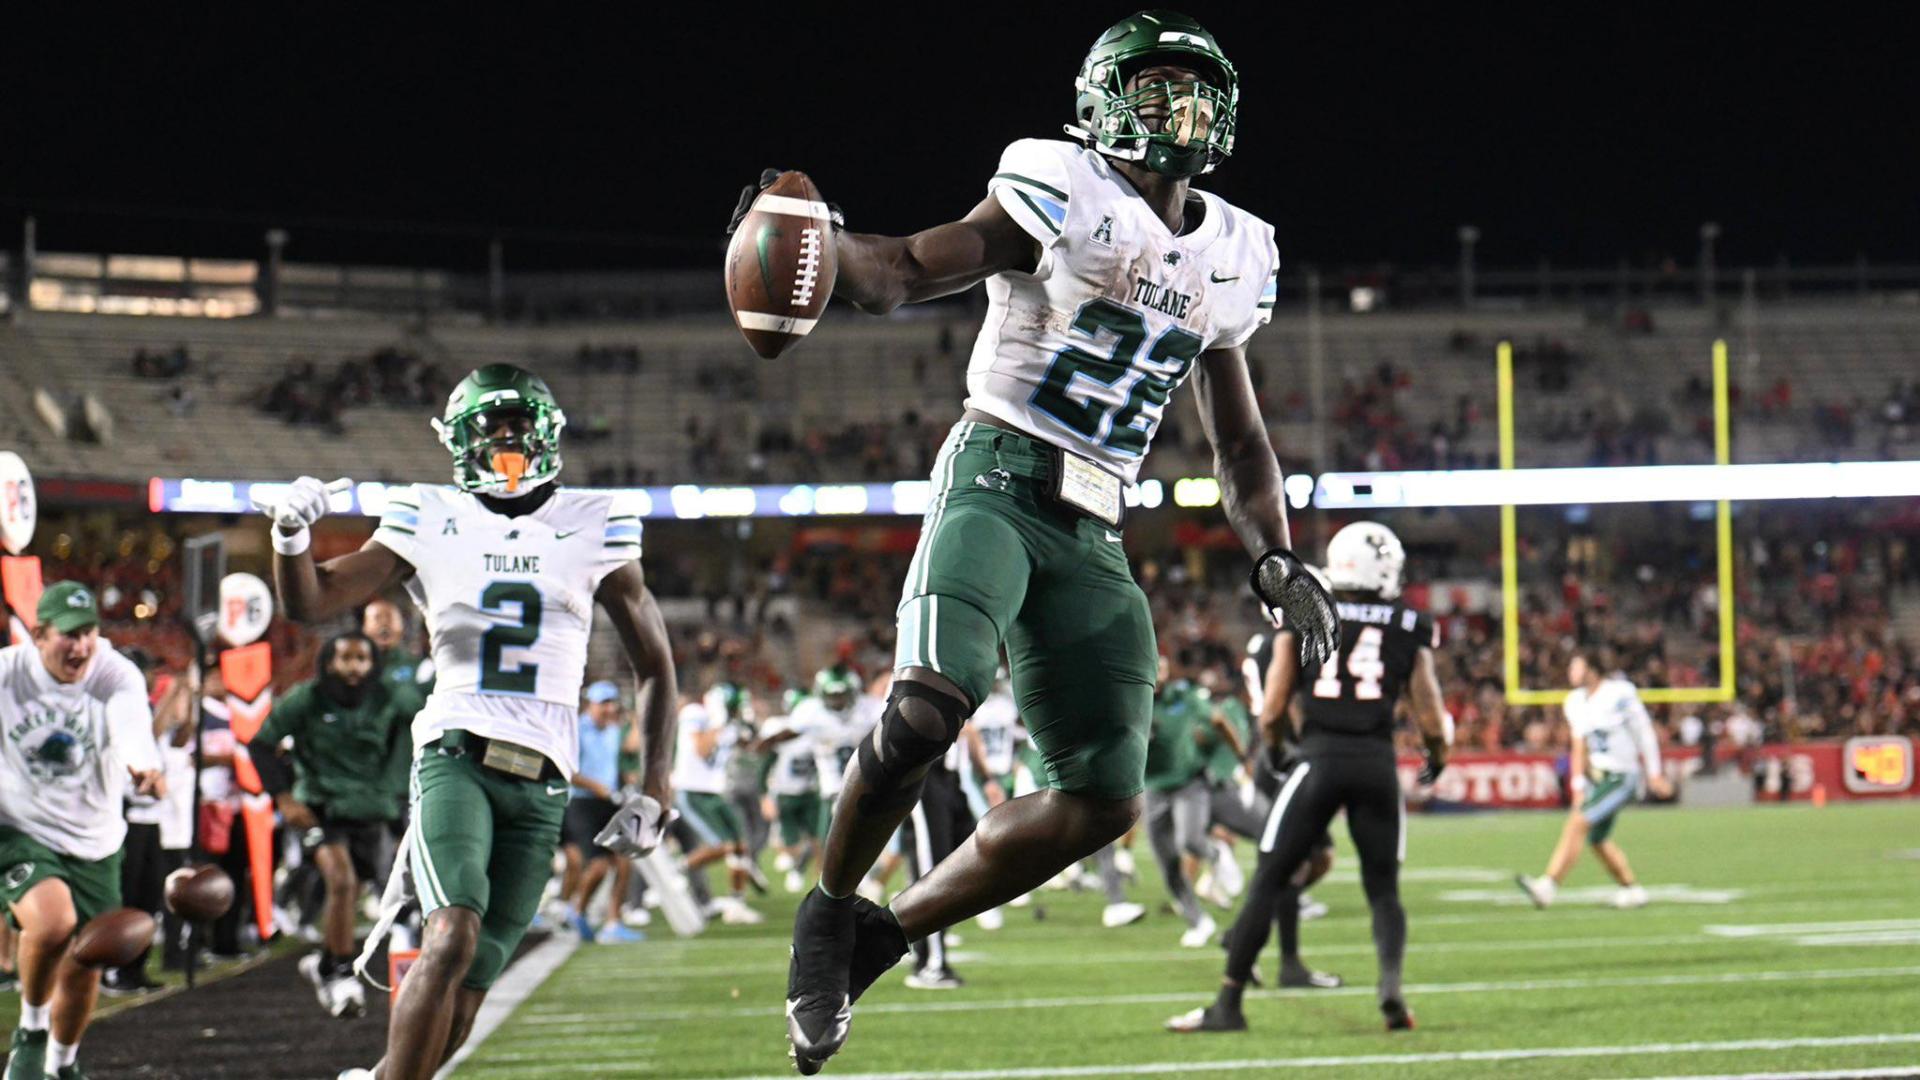 Tulane walks it off vs. Houston with TD in overtime